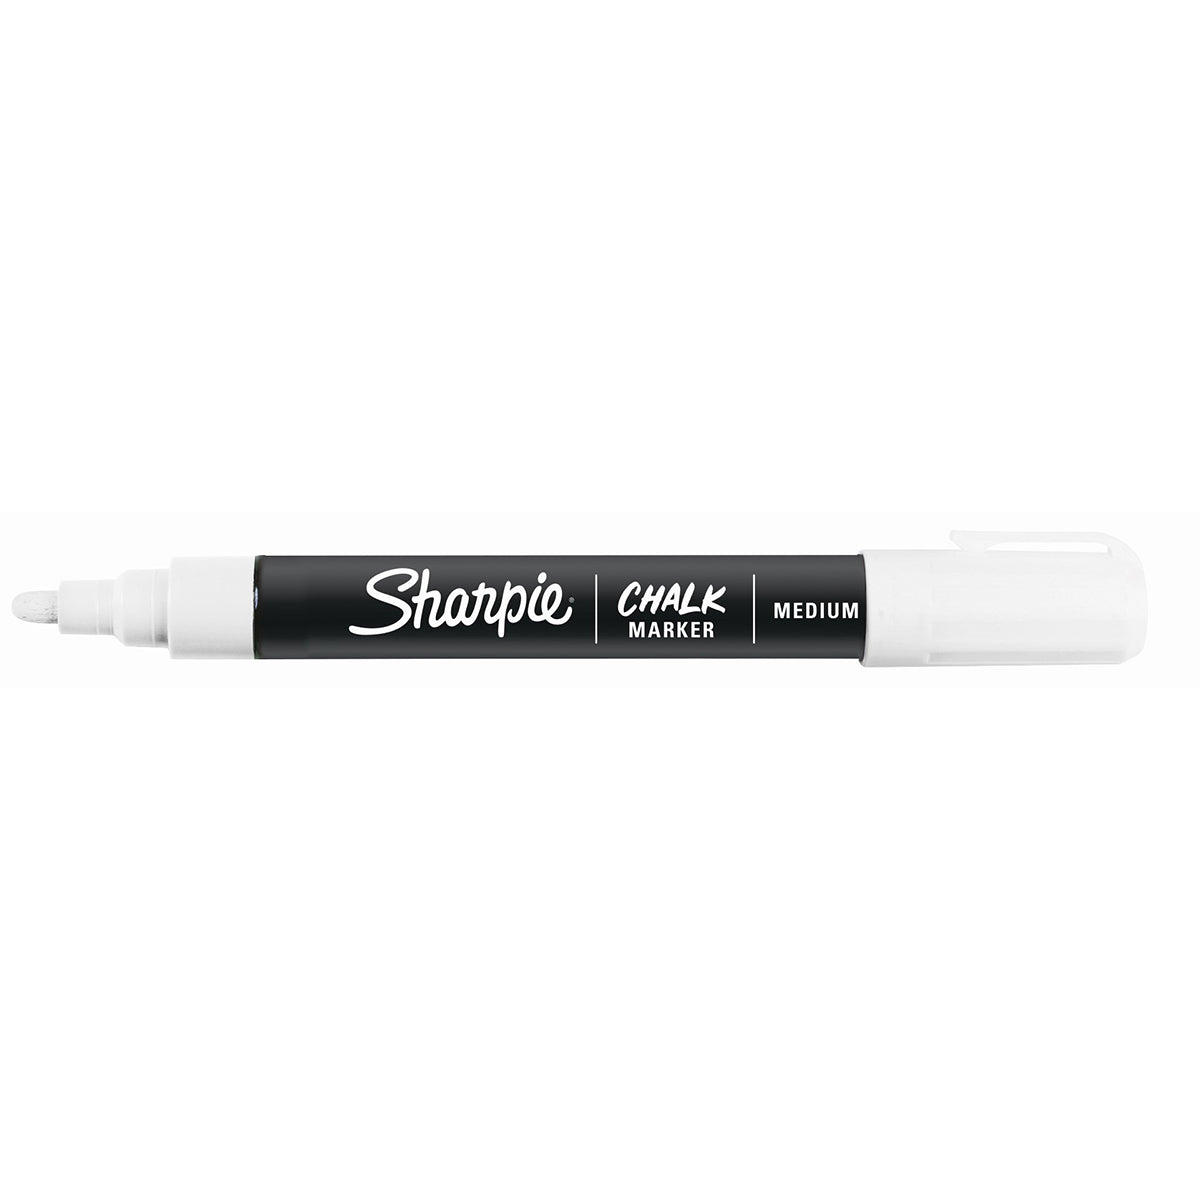 Wet Erase Markers Bulk Pack of 45 Assorted Colors by Sharpie  Sharpie Wet Erase Marker